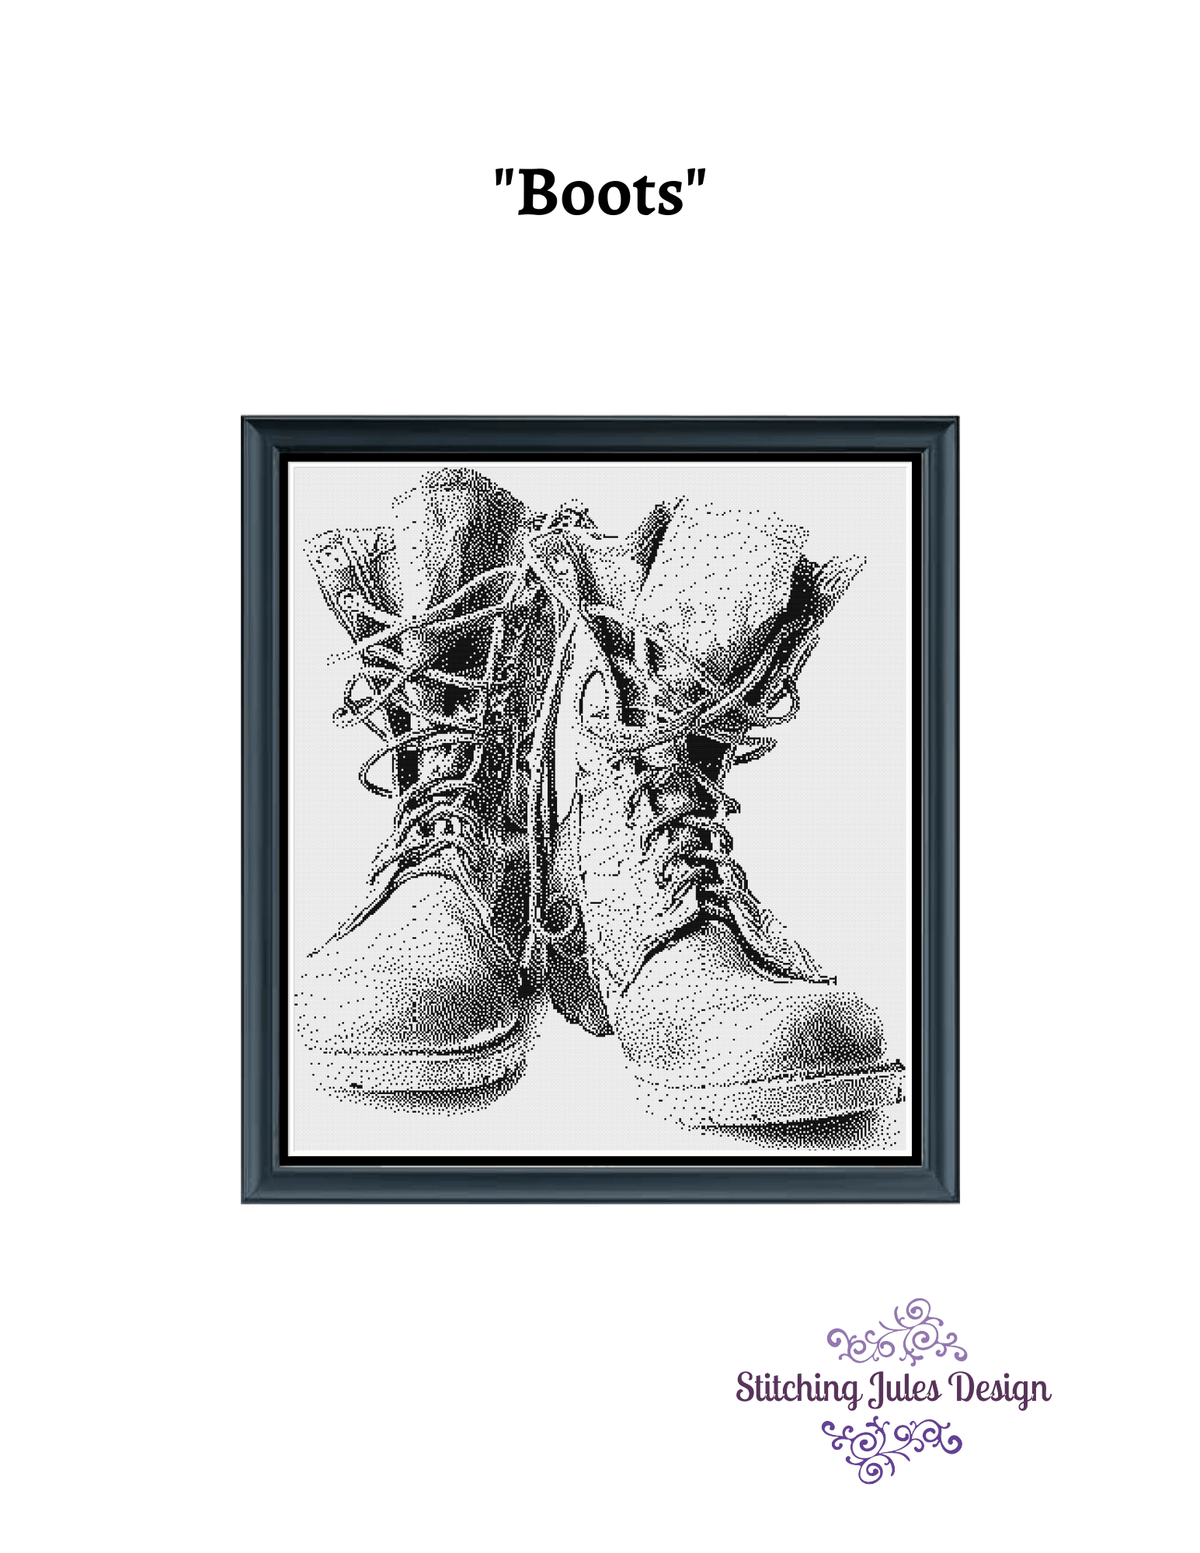 Stitching Jules Design Cross Stitch Pattern Monochrome Boots Military Shoes Cross Stitch Pattern Ready For Instant Download